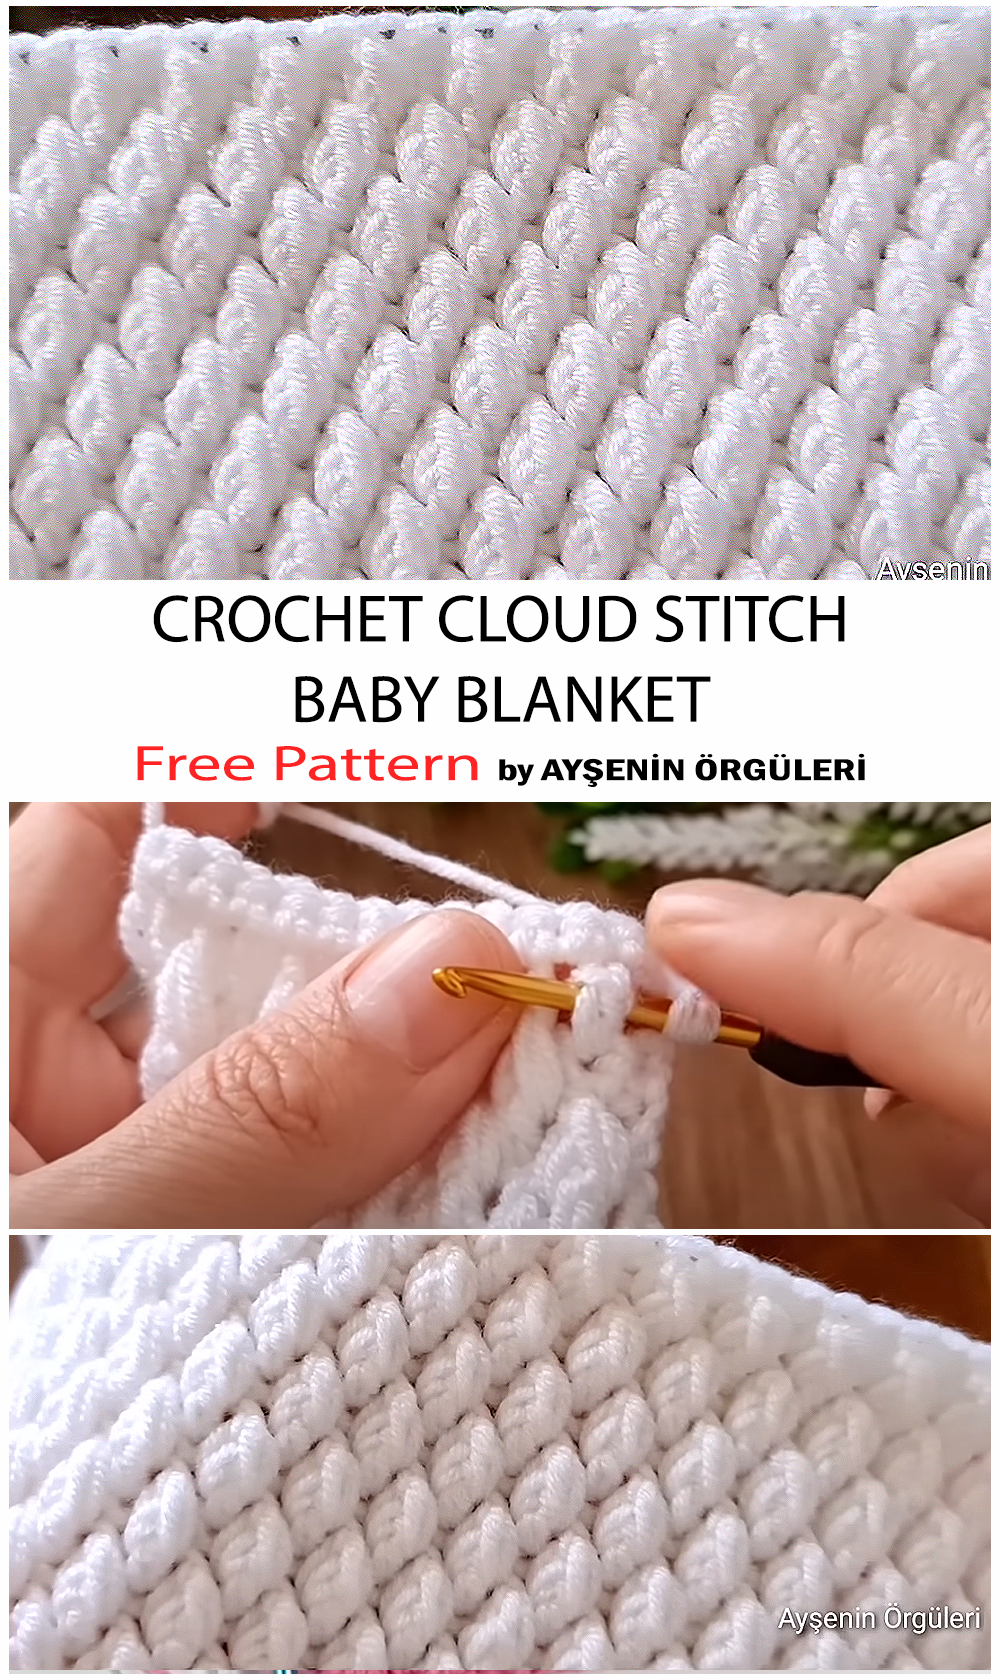 How To Crochet Cloud Stitch Baby Blanket - Free Pattern For Beginners